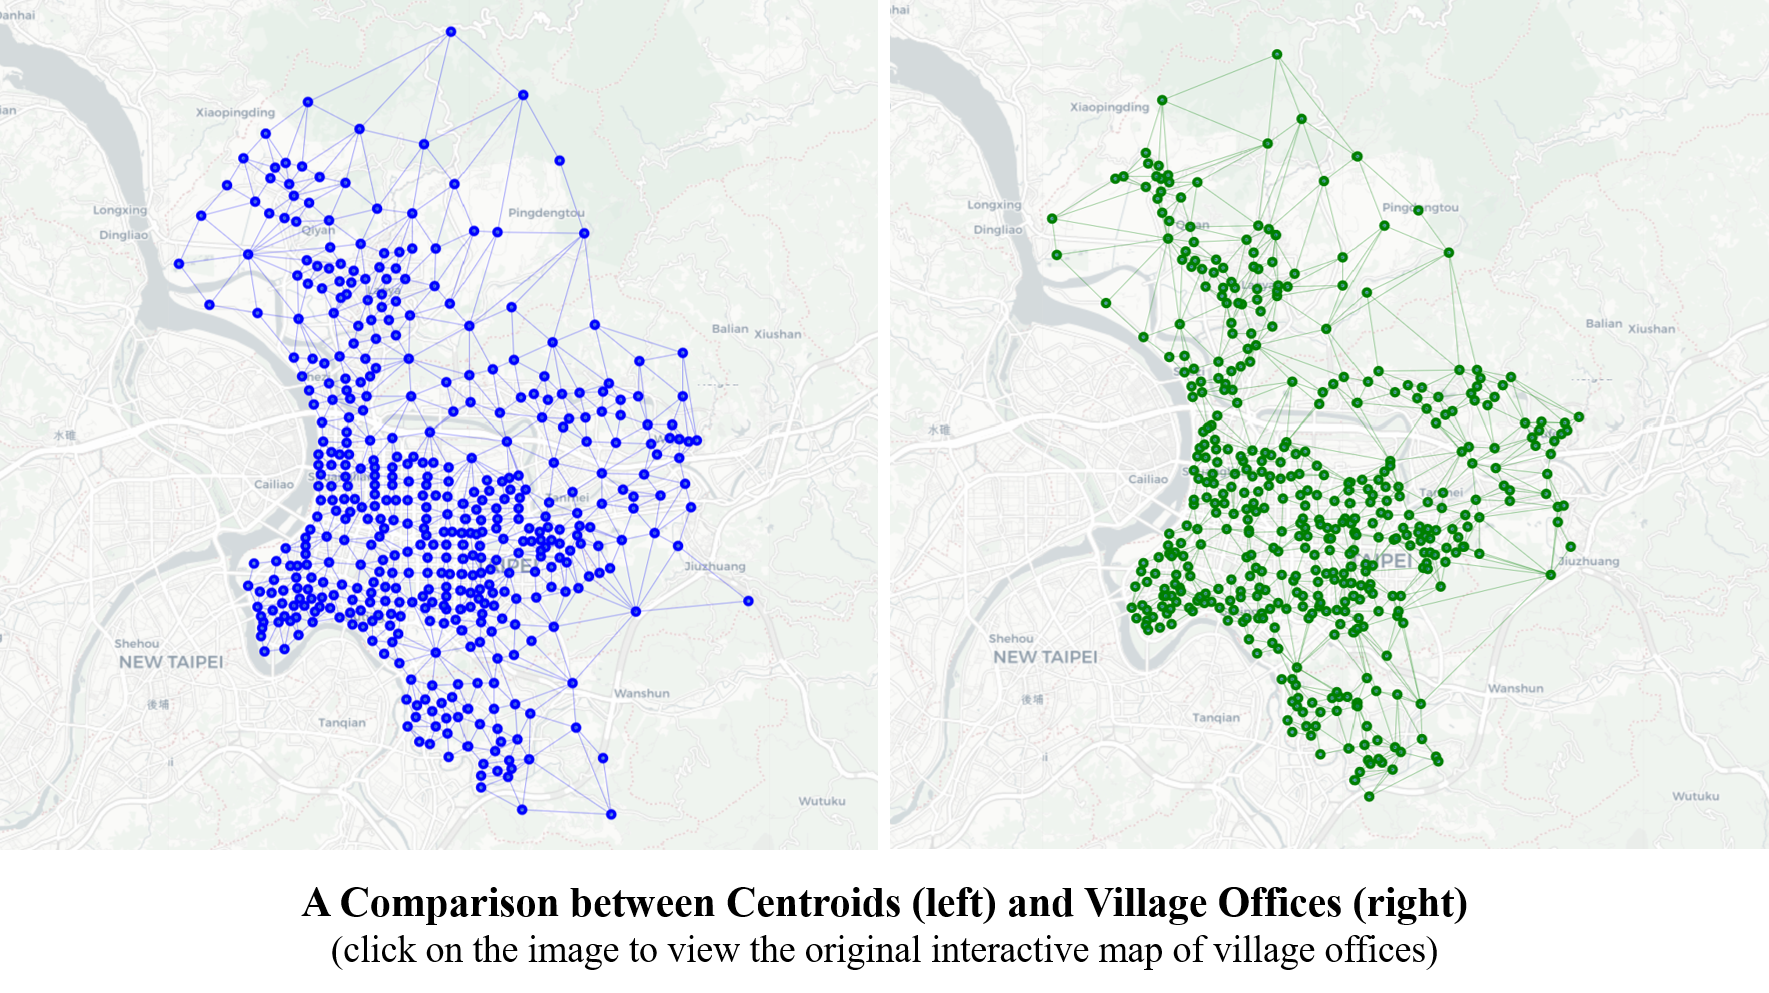 A_Comparison_between_Centroids_and_Village_Offices